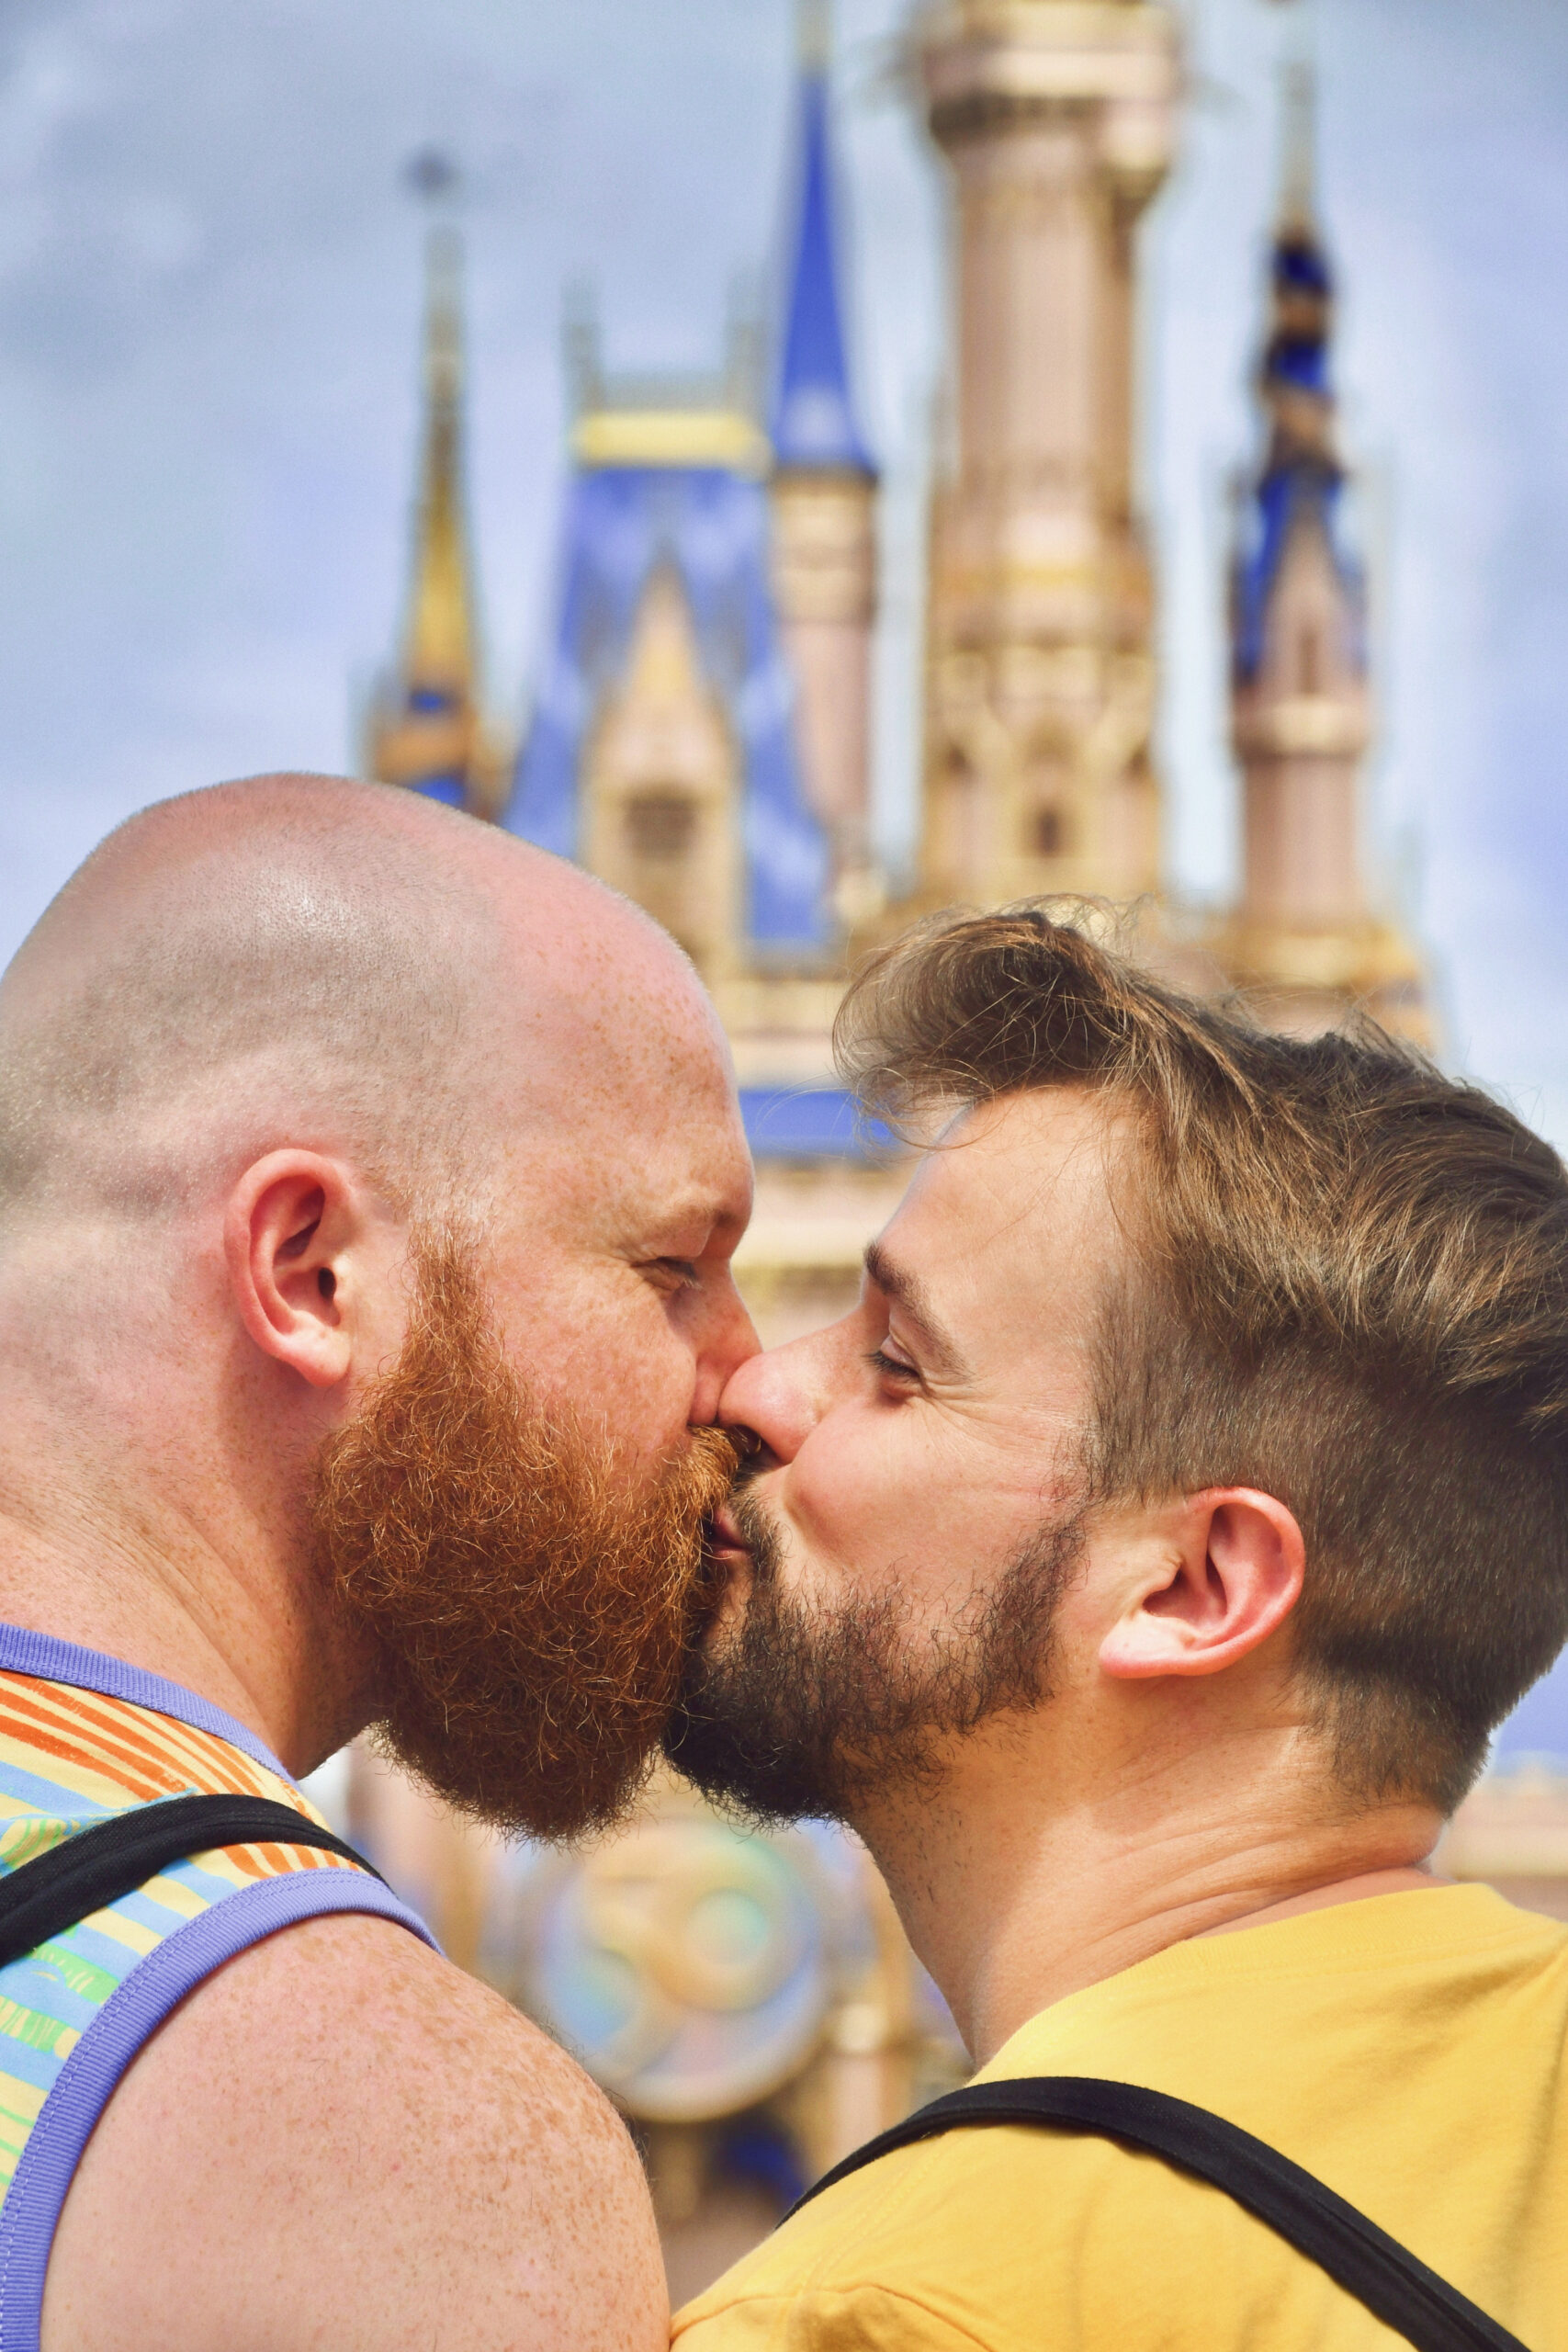 Hand in Hand in Disney World Orlando Florida - Disney supporting LGBT Community with the new Disney Pride Collection © Coupleofmen.com